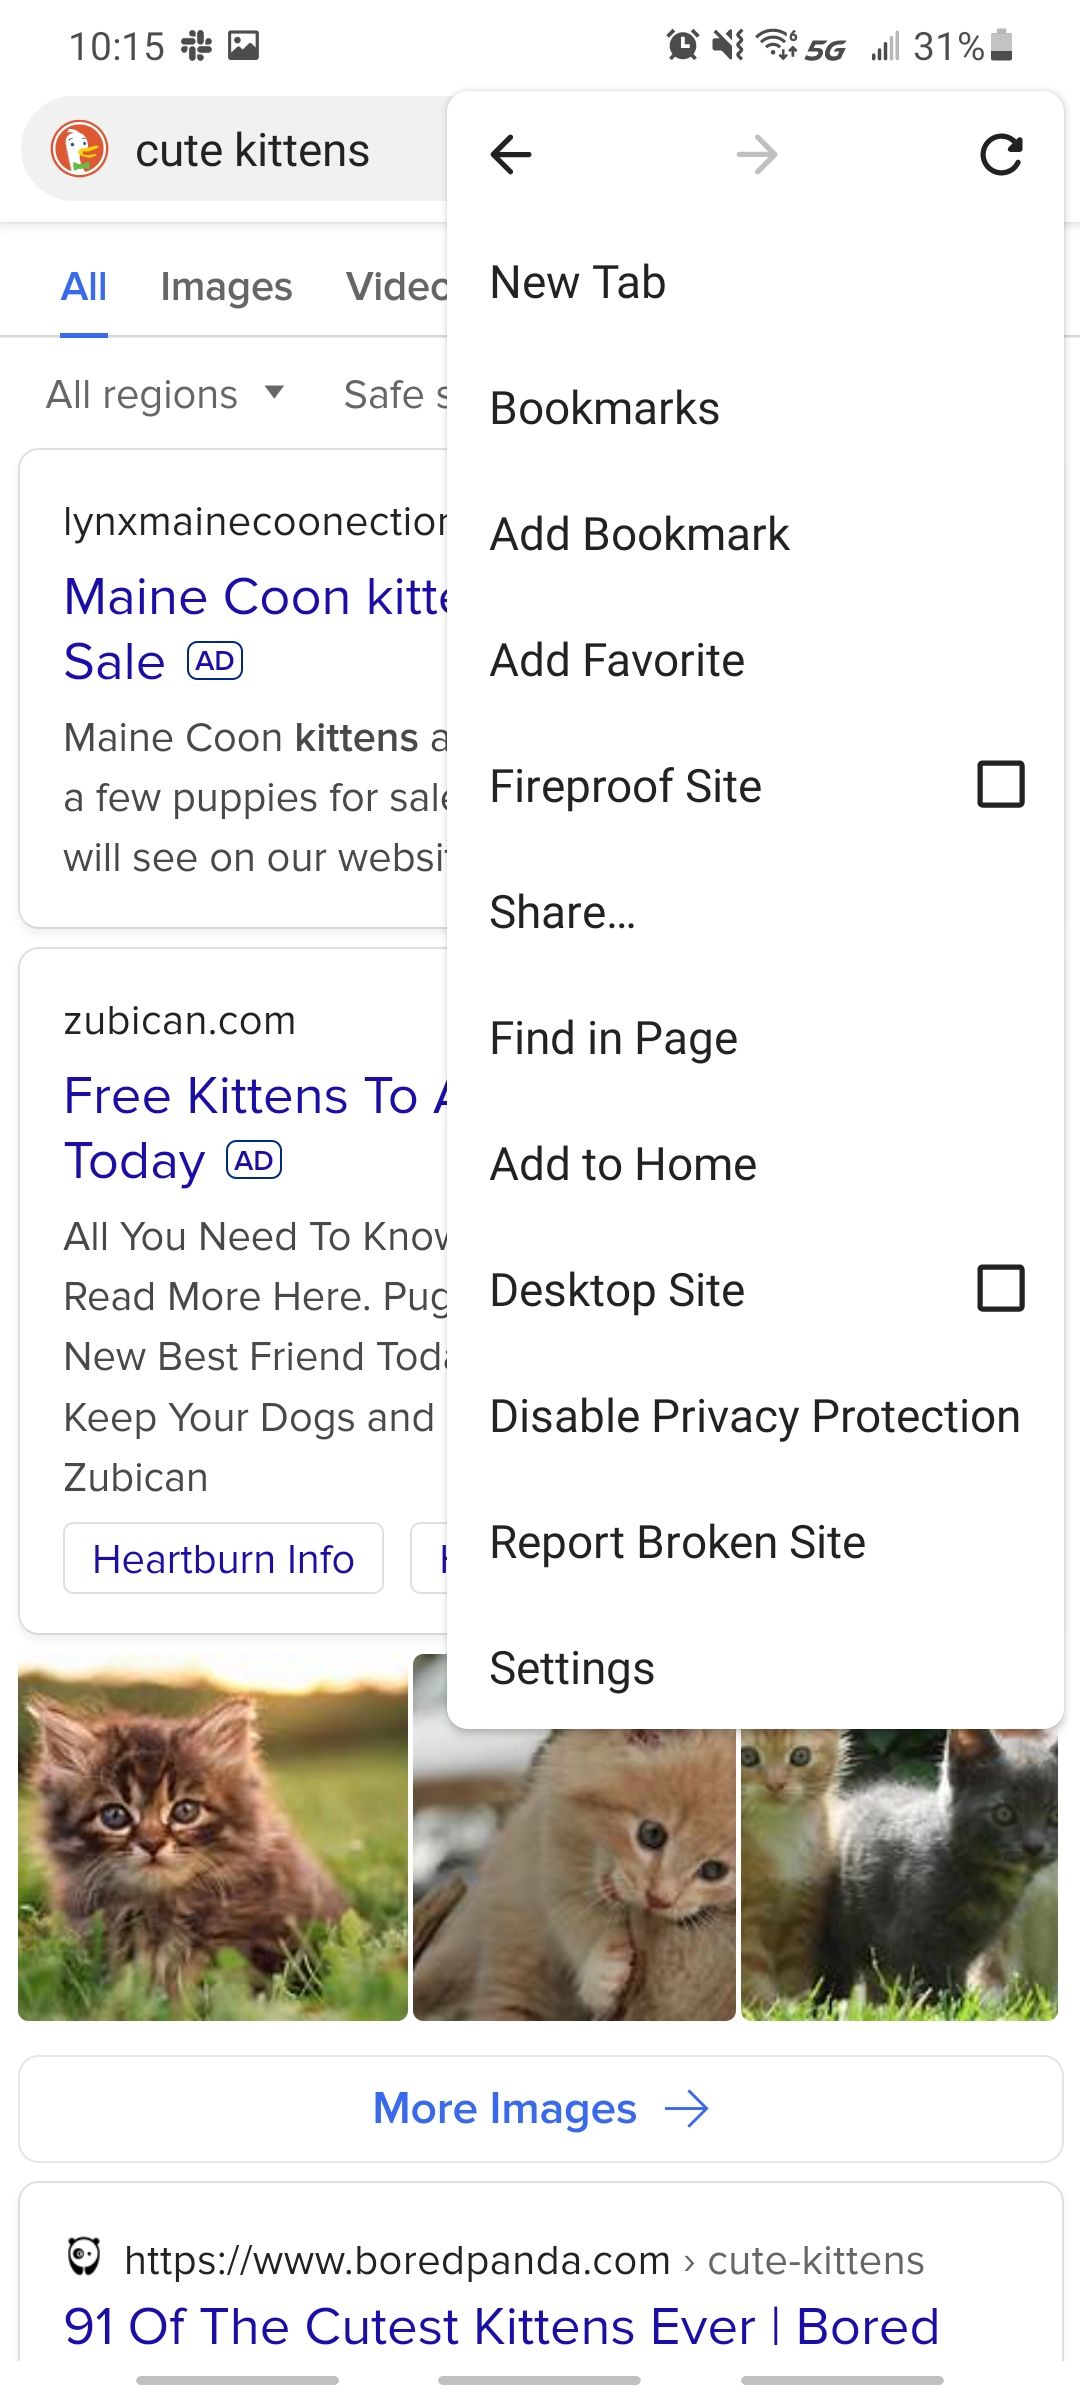 duckduckgobrowser settings menu on top of a search for cute kittens